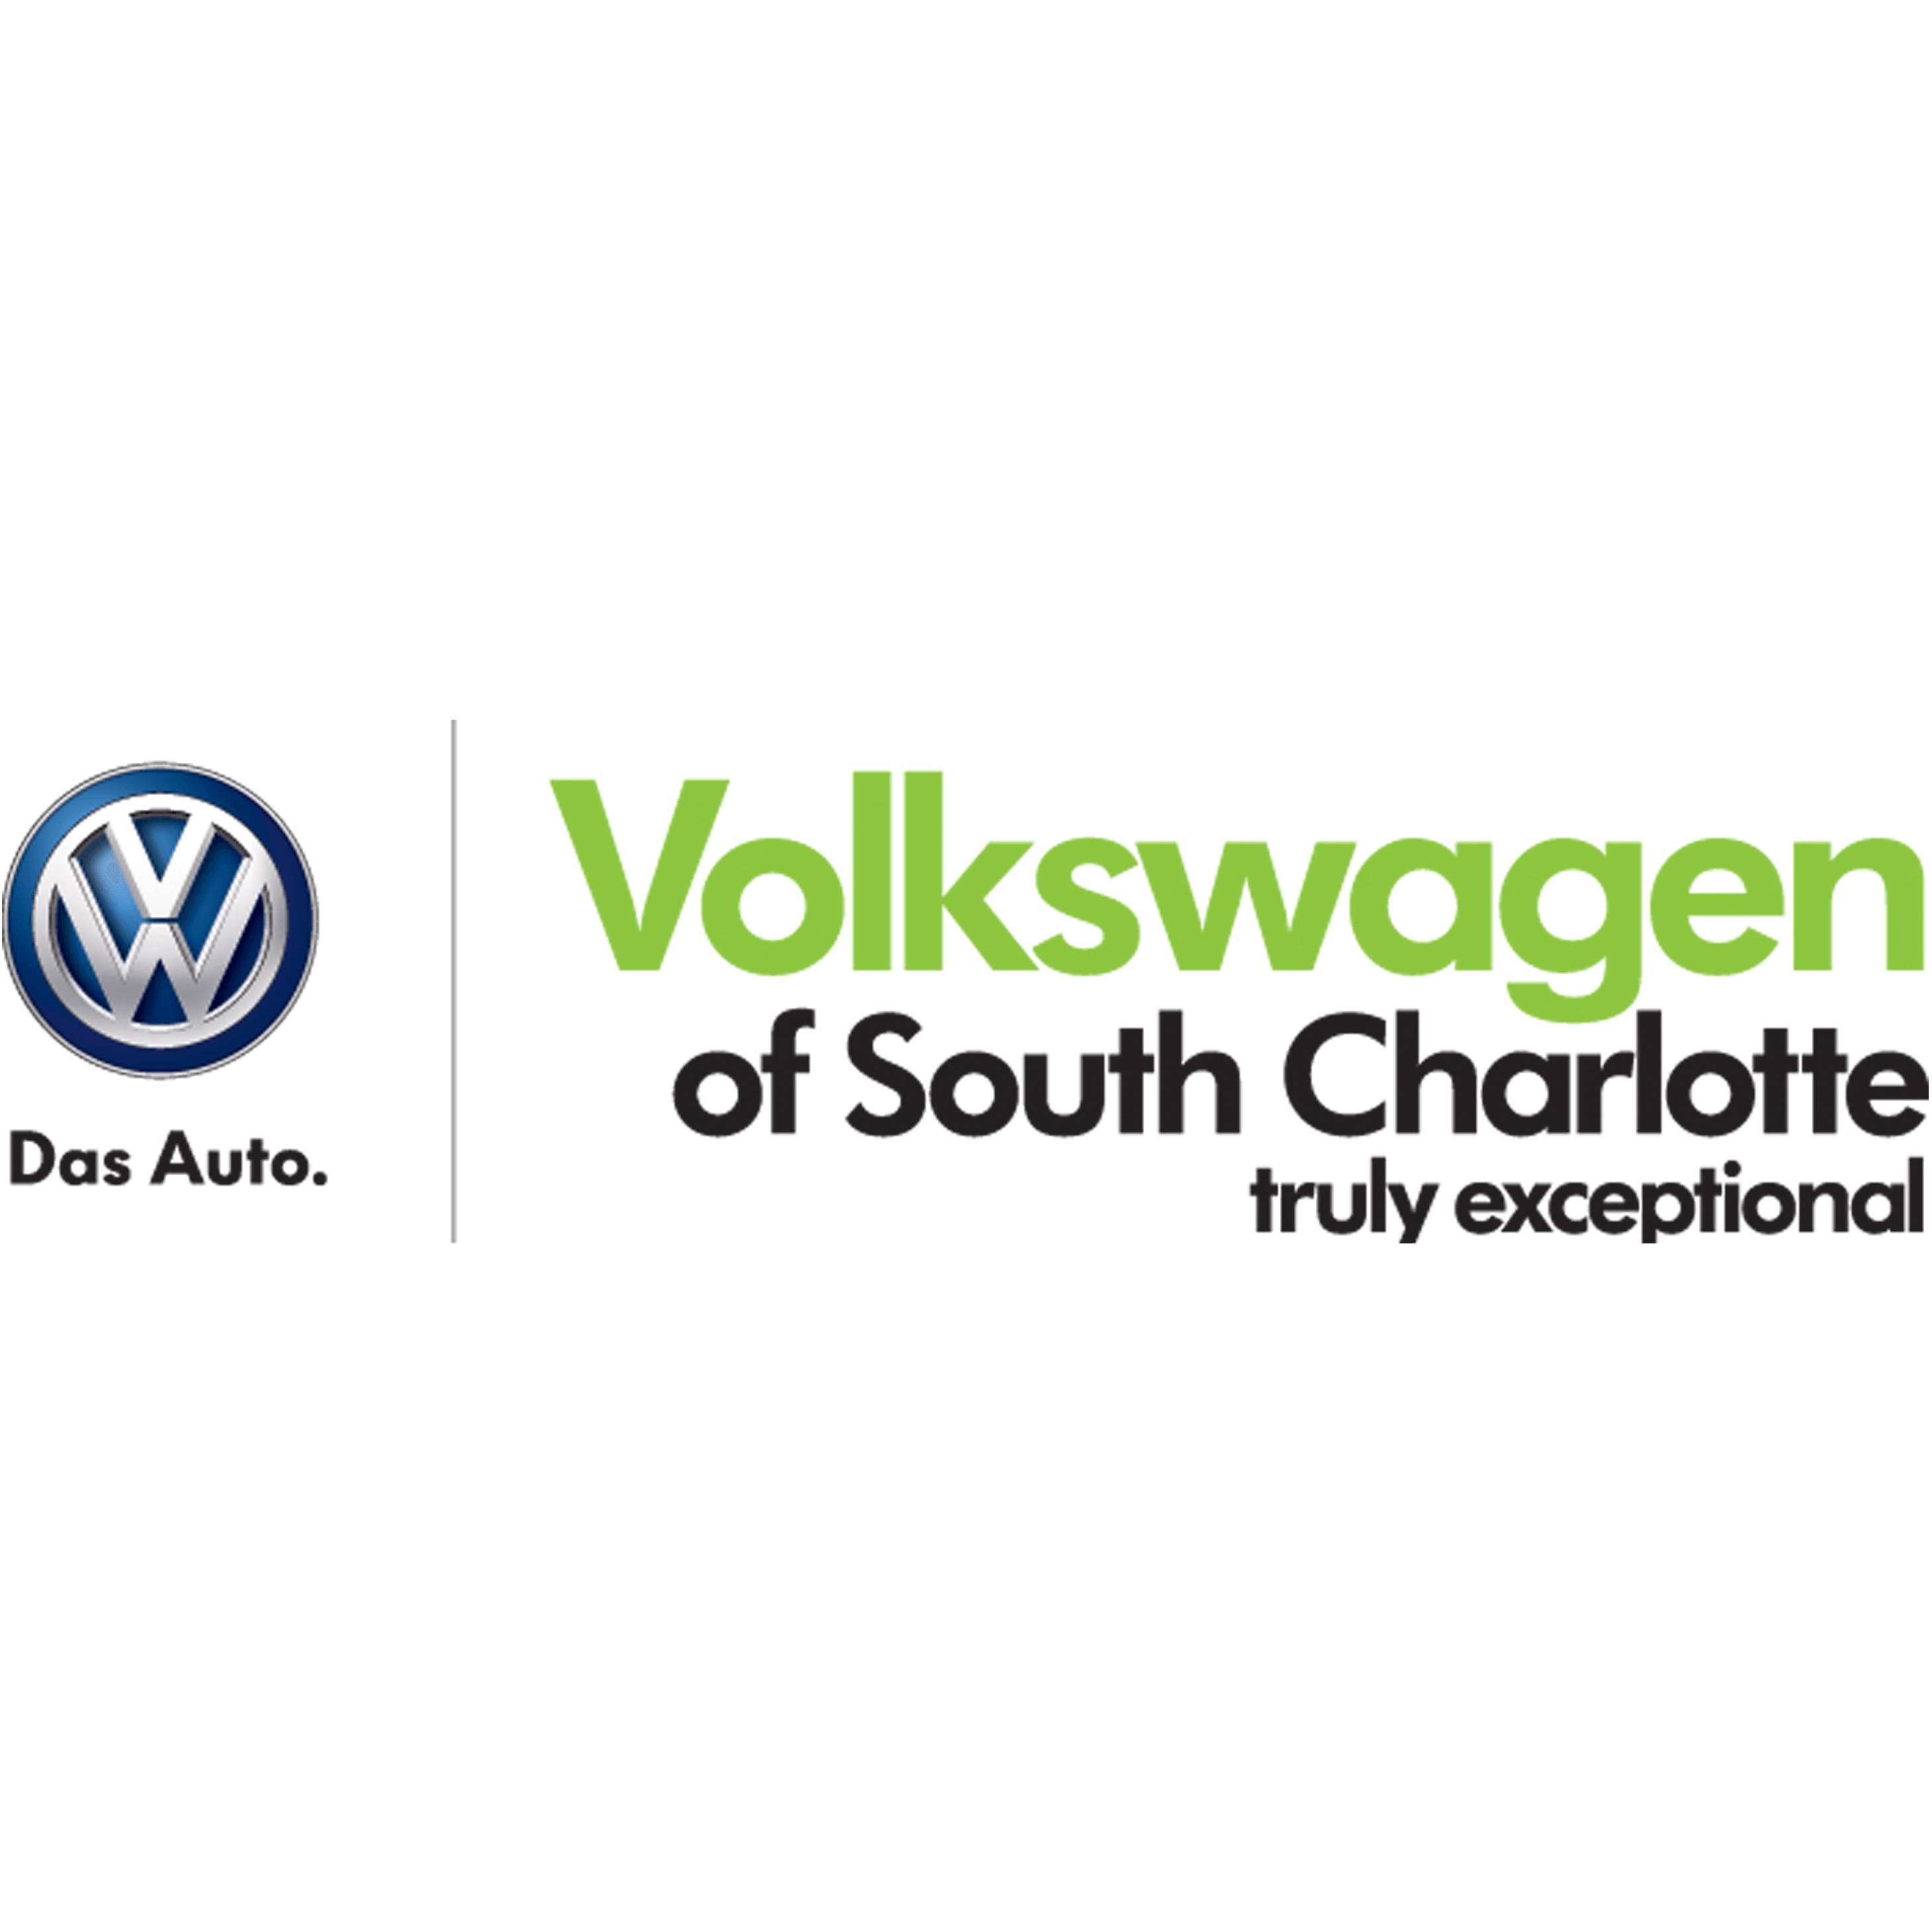 Volkswagen of South Charlotte Photo